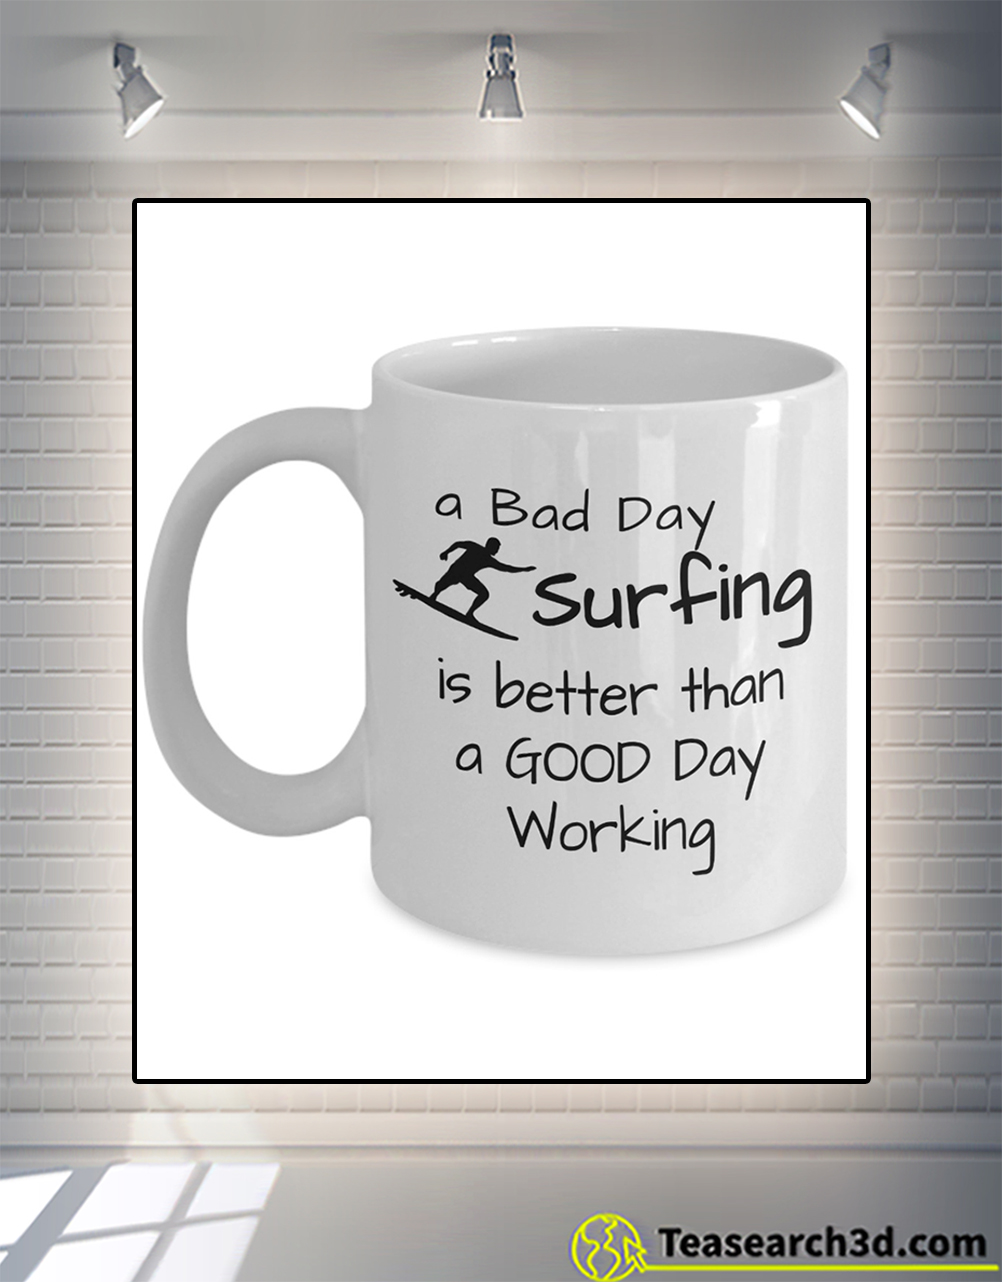 A bad day surfing is better than a good day working mug